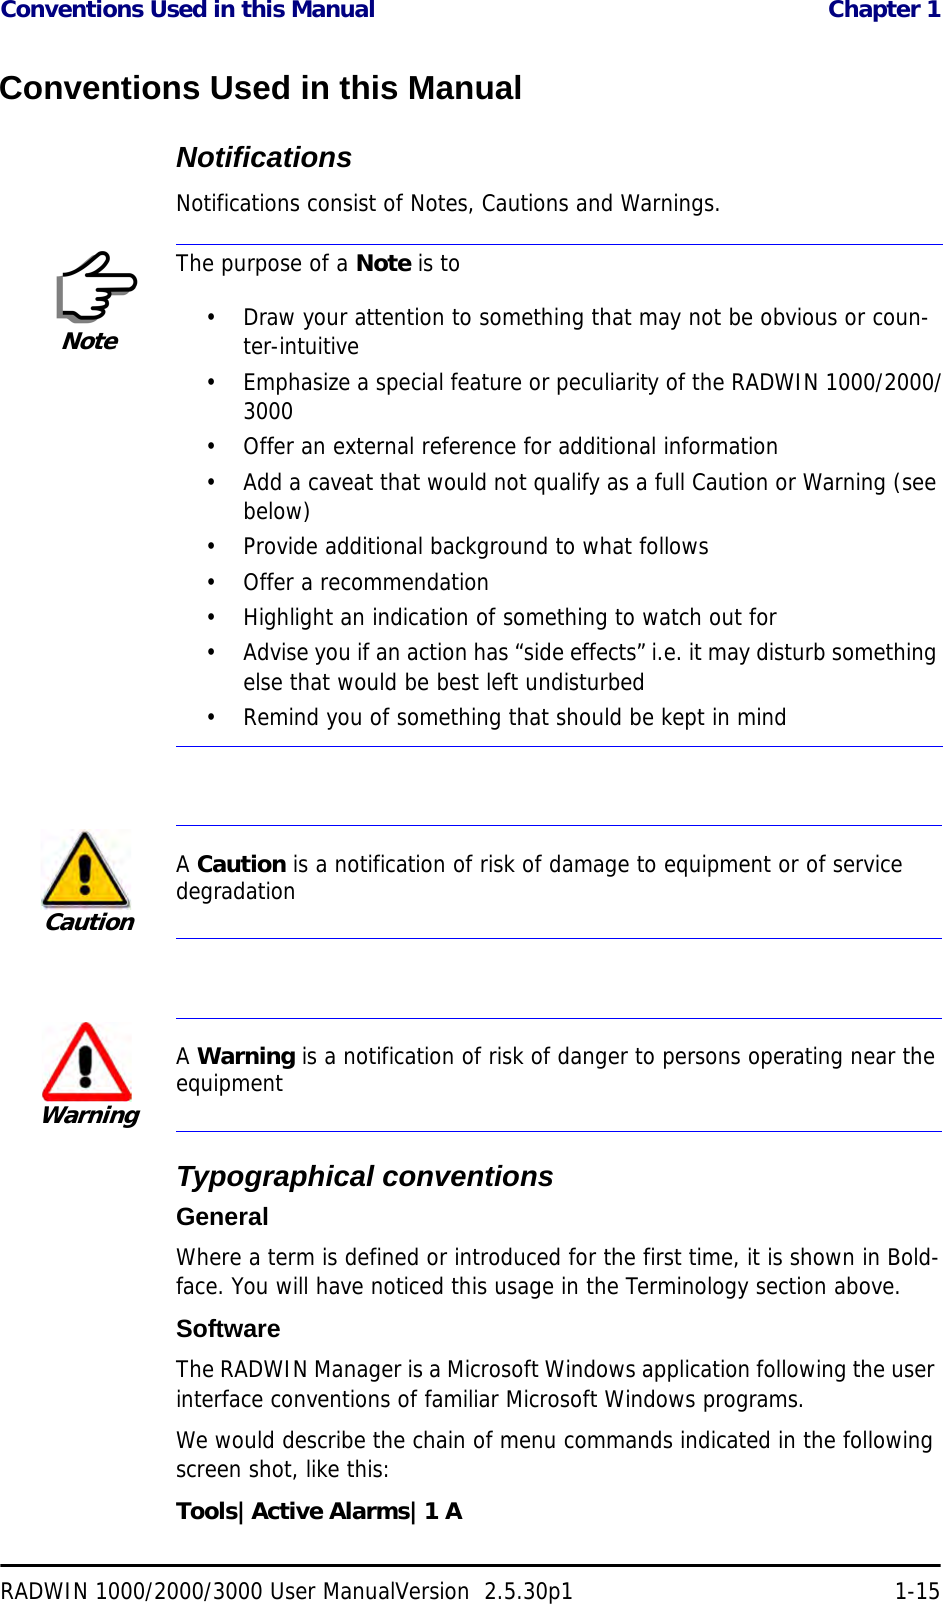 Conventions Used in this Manual  Chapter 1RADWIN 1000/2000/3000 User ManualVersion  2.5.30p1 1-15Conventions Used in this ManualNotificationsNotifications consist of Notes, Cautions and Warnings.Typographical conventionsGeneralWhere a term is defined or introduced for the first time, it is shown in Bold-face. You will have noticed this usage in the Terminology section above.SoftwareThe RADWIN Manager is a Microsoft Windows application following the user interface conventions of familiar Microsoft Windows programs.We would describe the chain of menu commands indicated in the following screen shot, like this:Tools|Active Alarms|1 ANoteThe purpose of a Note is to• Draw your attention to something that may not be obvious or coun-ter-intuitive• Emphasize a special feature or peculiarity of the RADWIN 1000/2000/3000• Offer an external reference for additional information• Add a caveat that would not qualify as a full Caution or Warning (see below)• Provide additional background to what follows• Offer a recommendation• Highlight an indication of something to watch out for• Advise you if an action has “side effects” i.e. it may disturb something else that would be best left undisturbed• Remind you of something that should be kept in mindCautionA Caution is a notification of risk of damage to equipment or of service degradationWarningA Warning is a notification of risk of danger to persons operating near the equipment